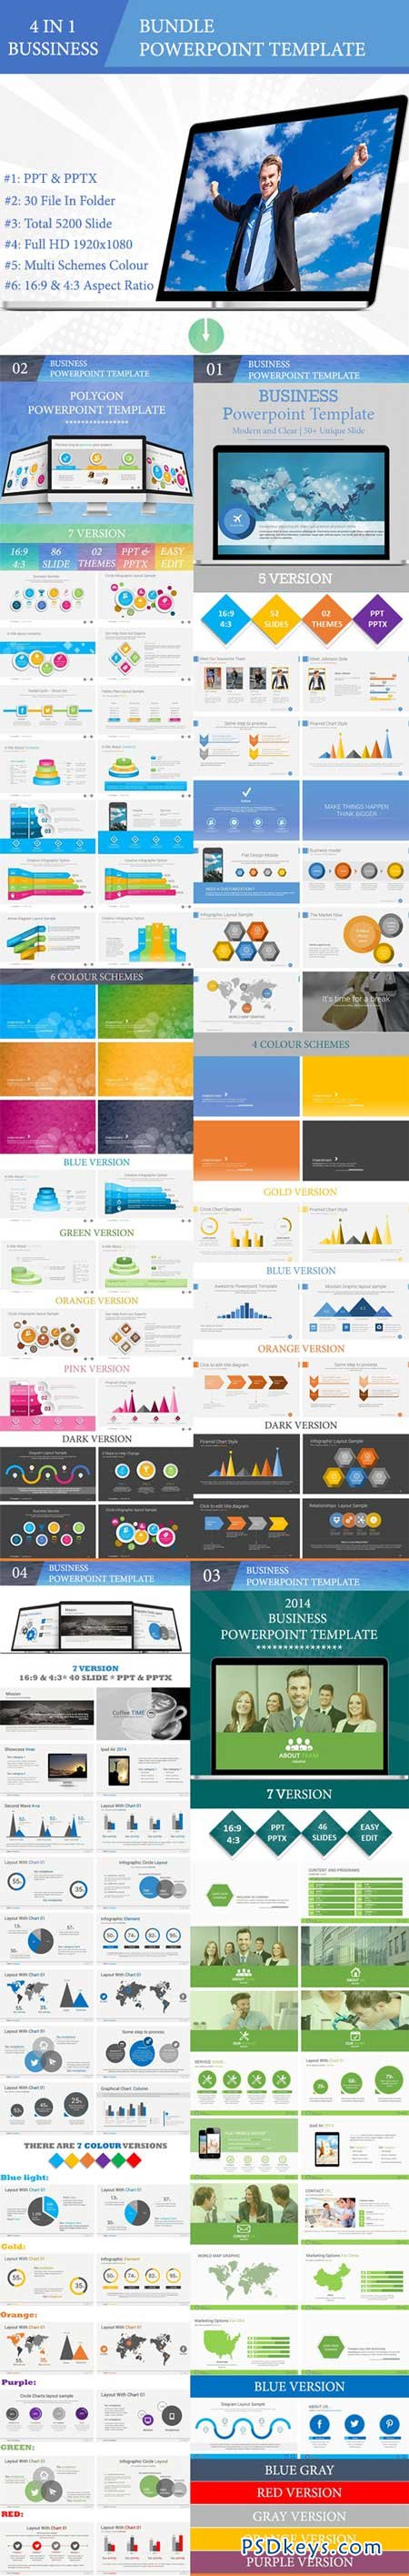 Bundle 4 in 1 Business PowerPoint Templates 9013192